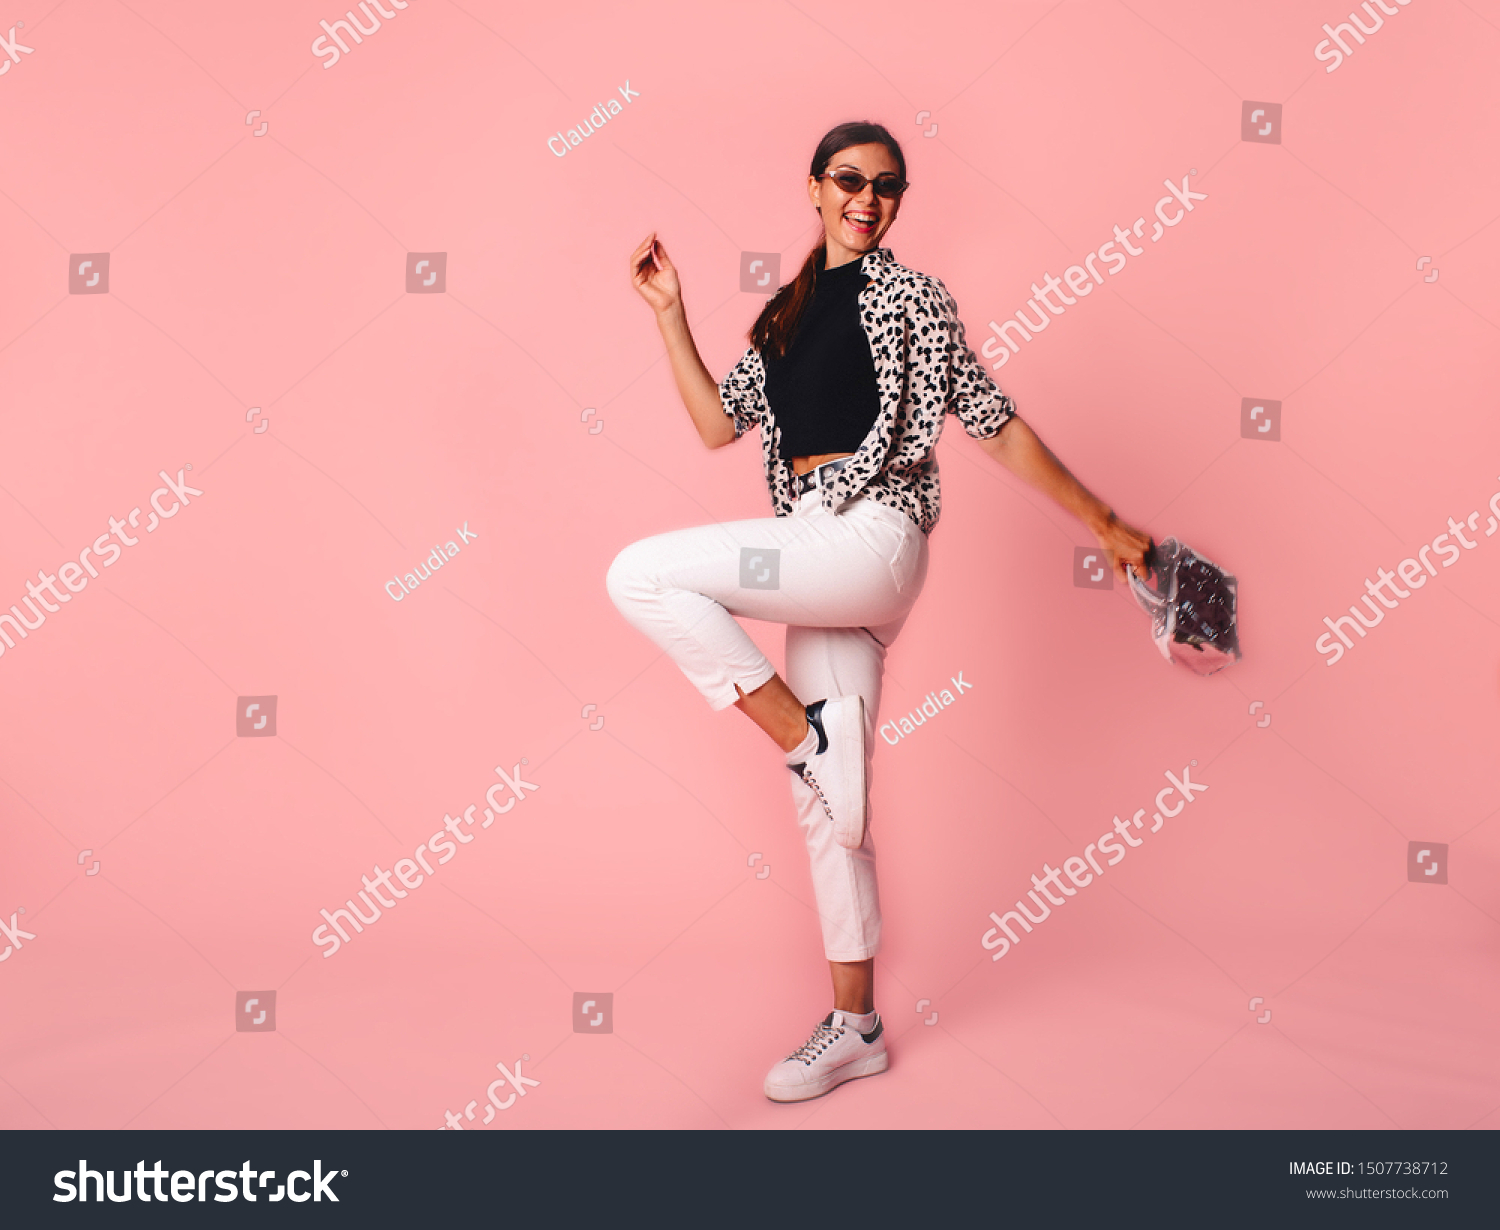 Full Length Portrait of Trendy Hipster Girl Standing at the pink Wall Background. Urban Fashion Concept. Copy Space. #1507738712